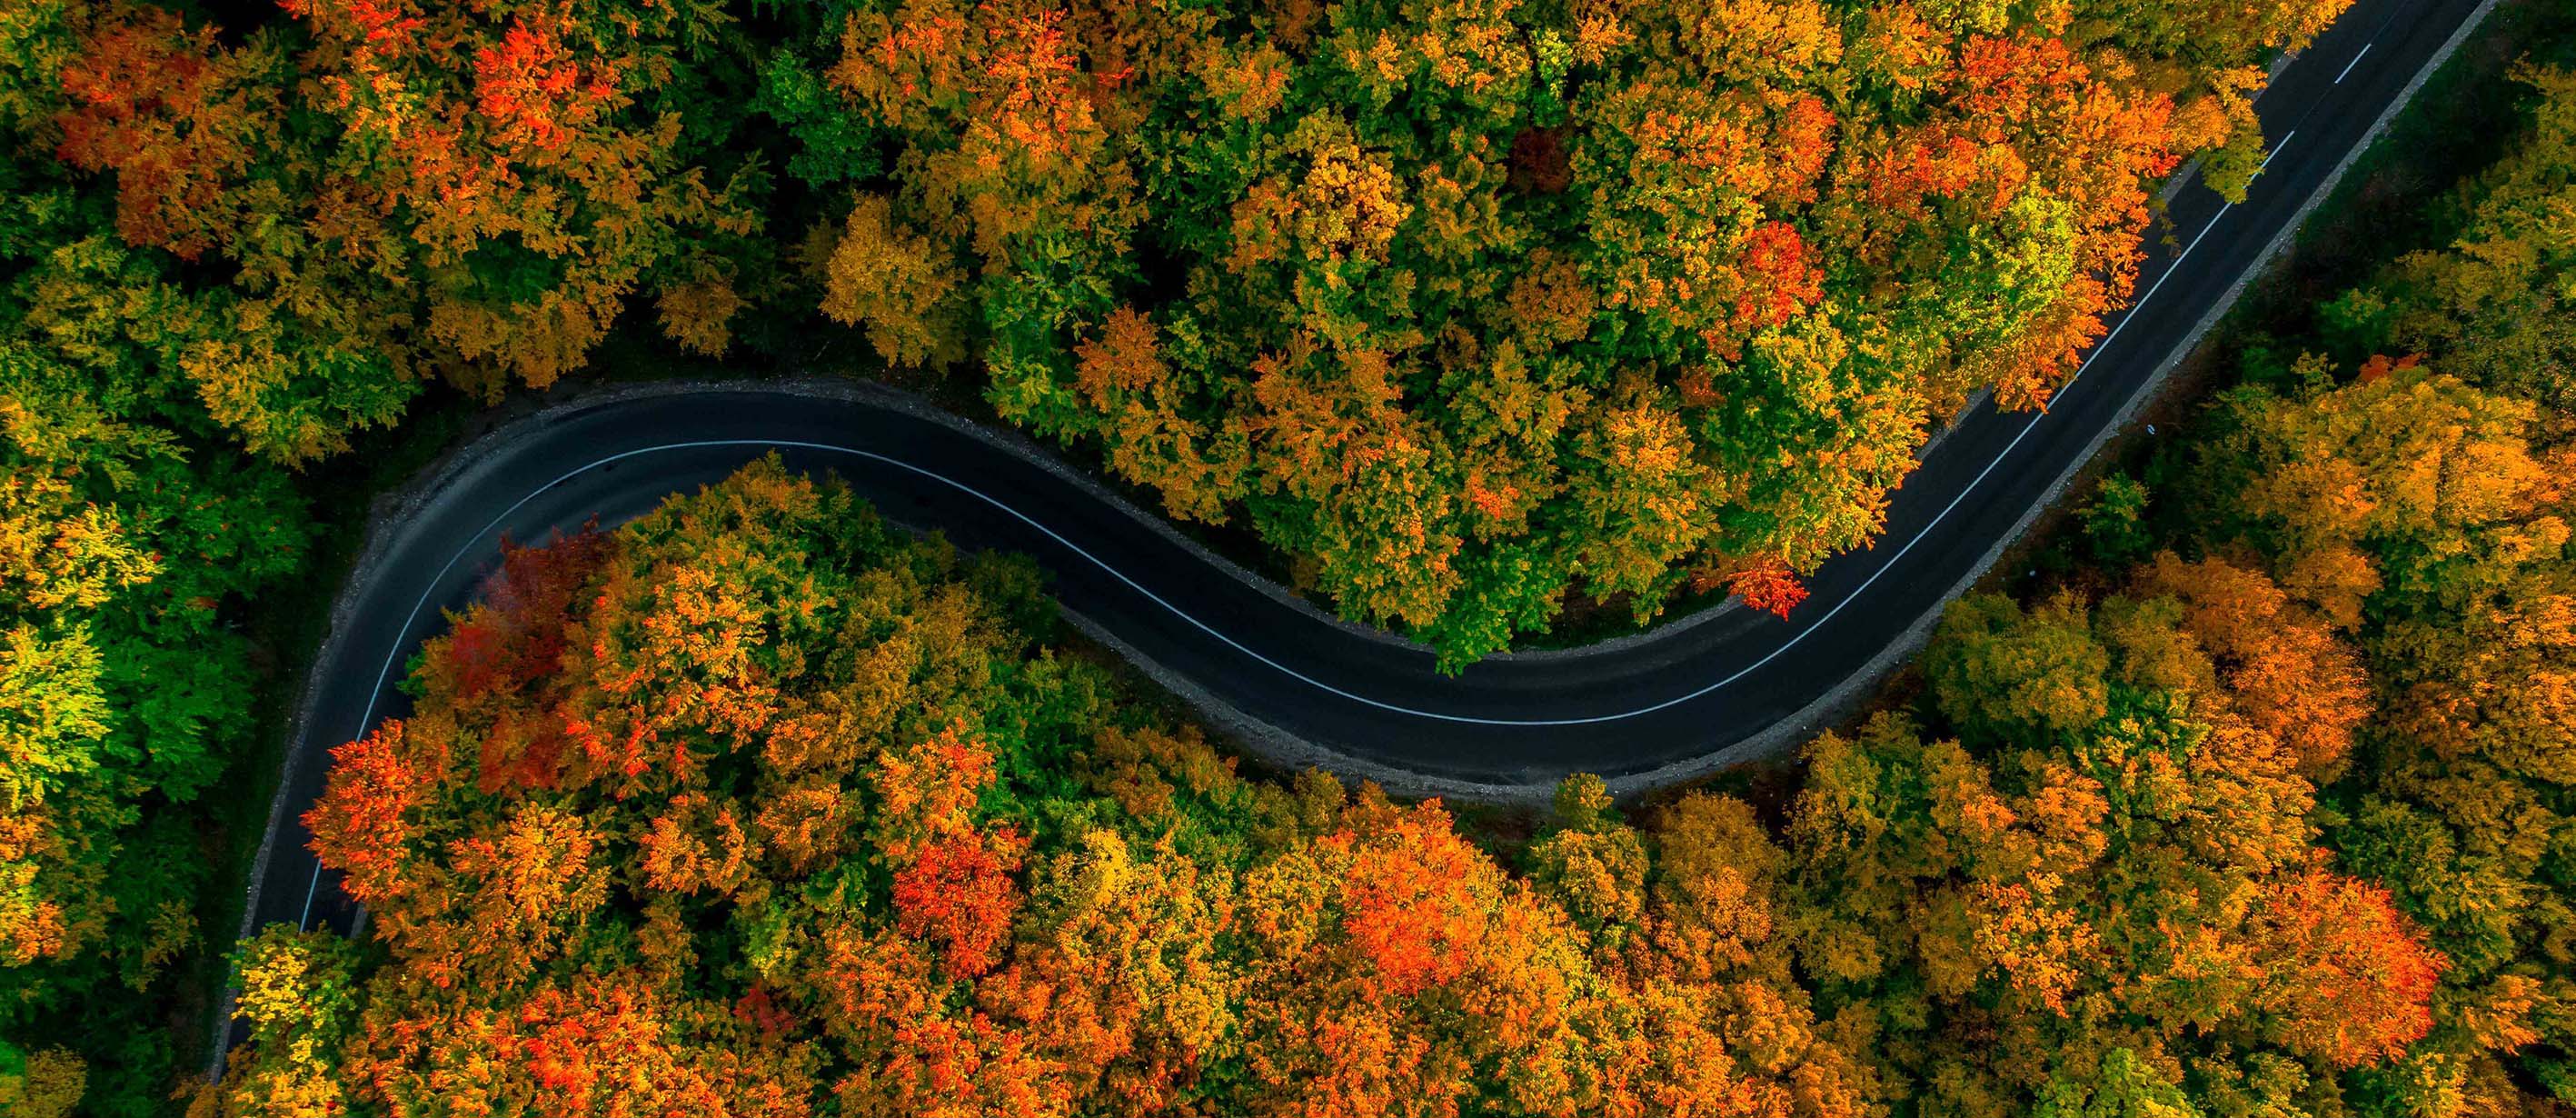 Autumn road - drone shot of road in forest